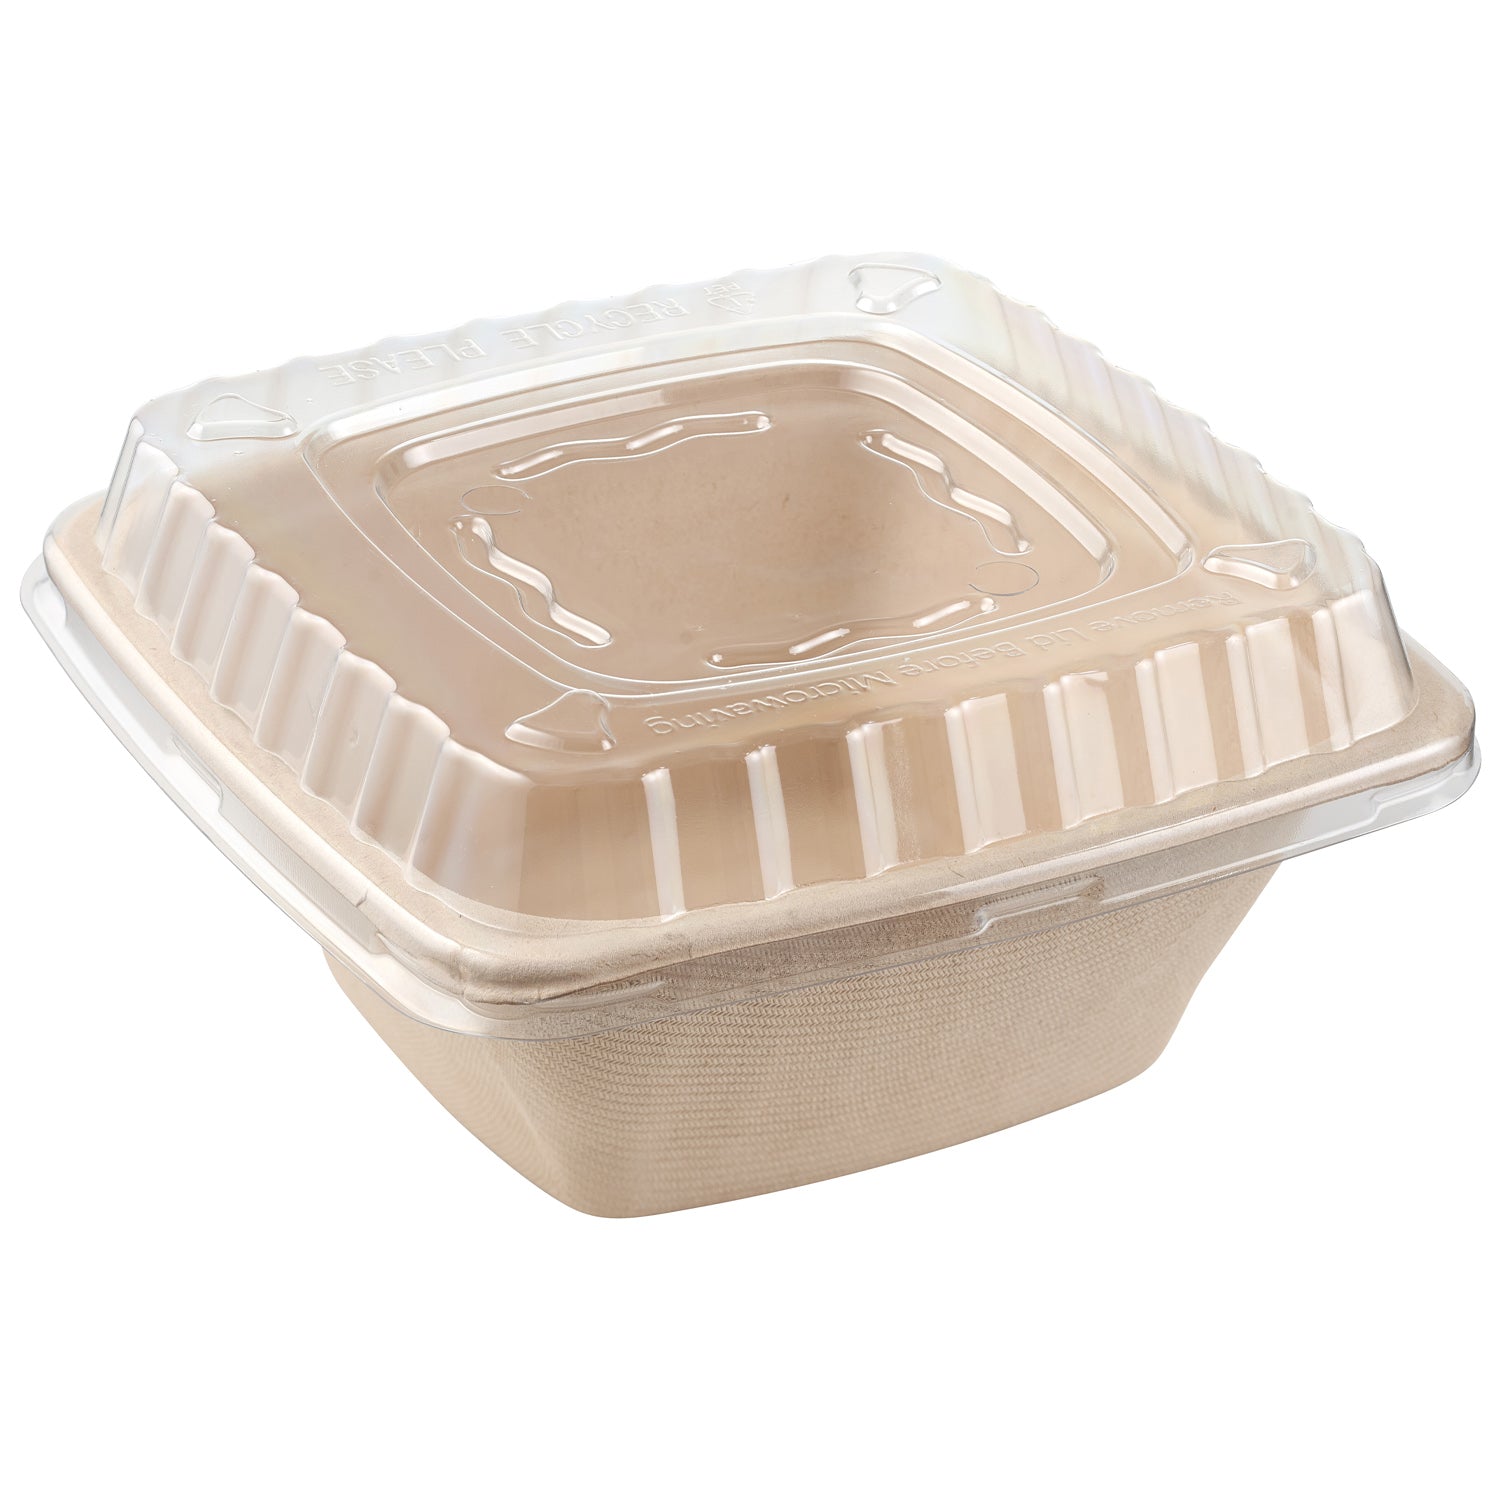 16oz Eco Friendly Disposable Square Bowls Compostable Container with Dome Lids